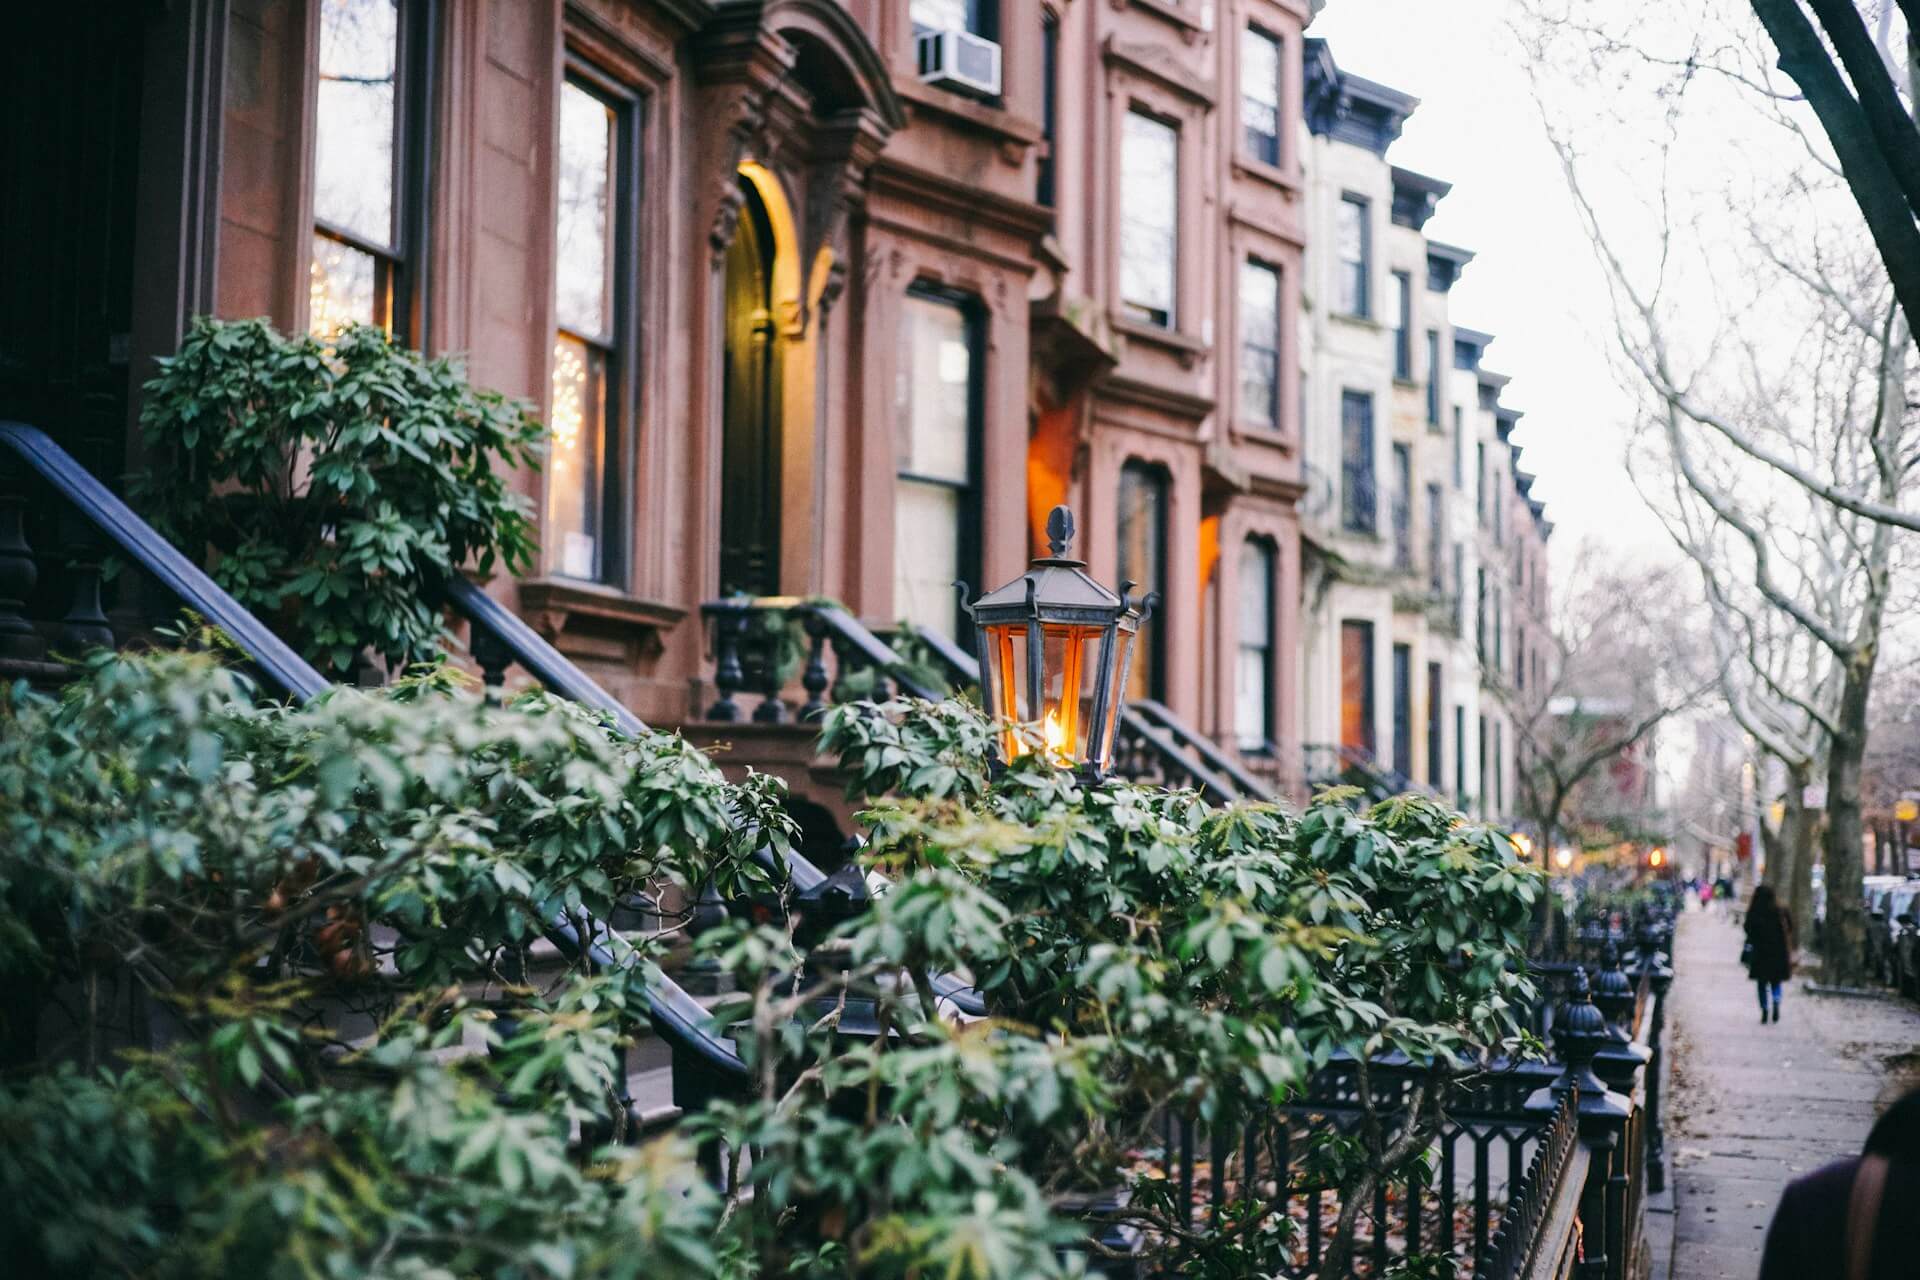 A series of homes lining a street in Park Slope Brooklyn